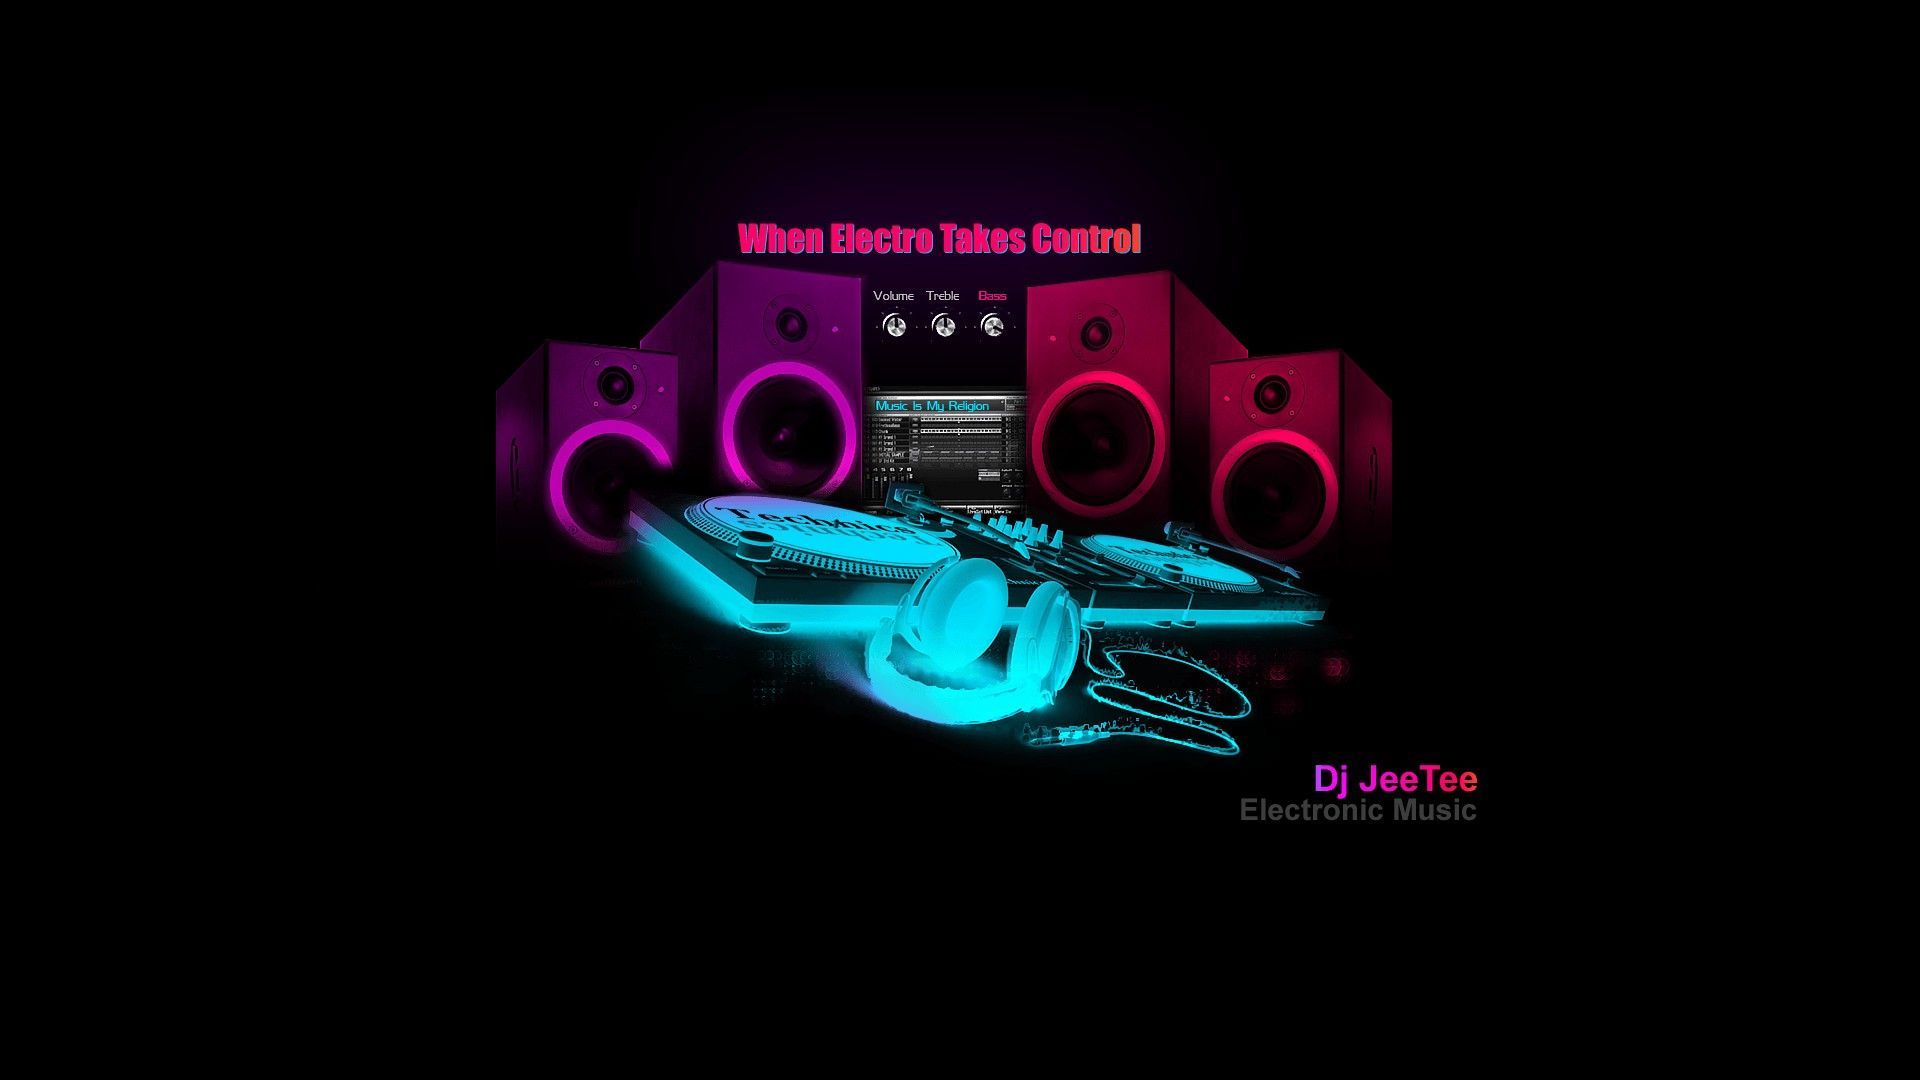 Awesome 3D Music Wallpaper Free Download. Music wallpaper, House music dj, House music